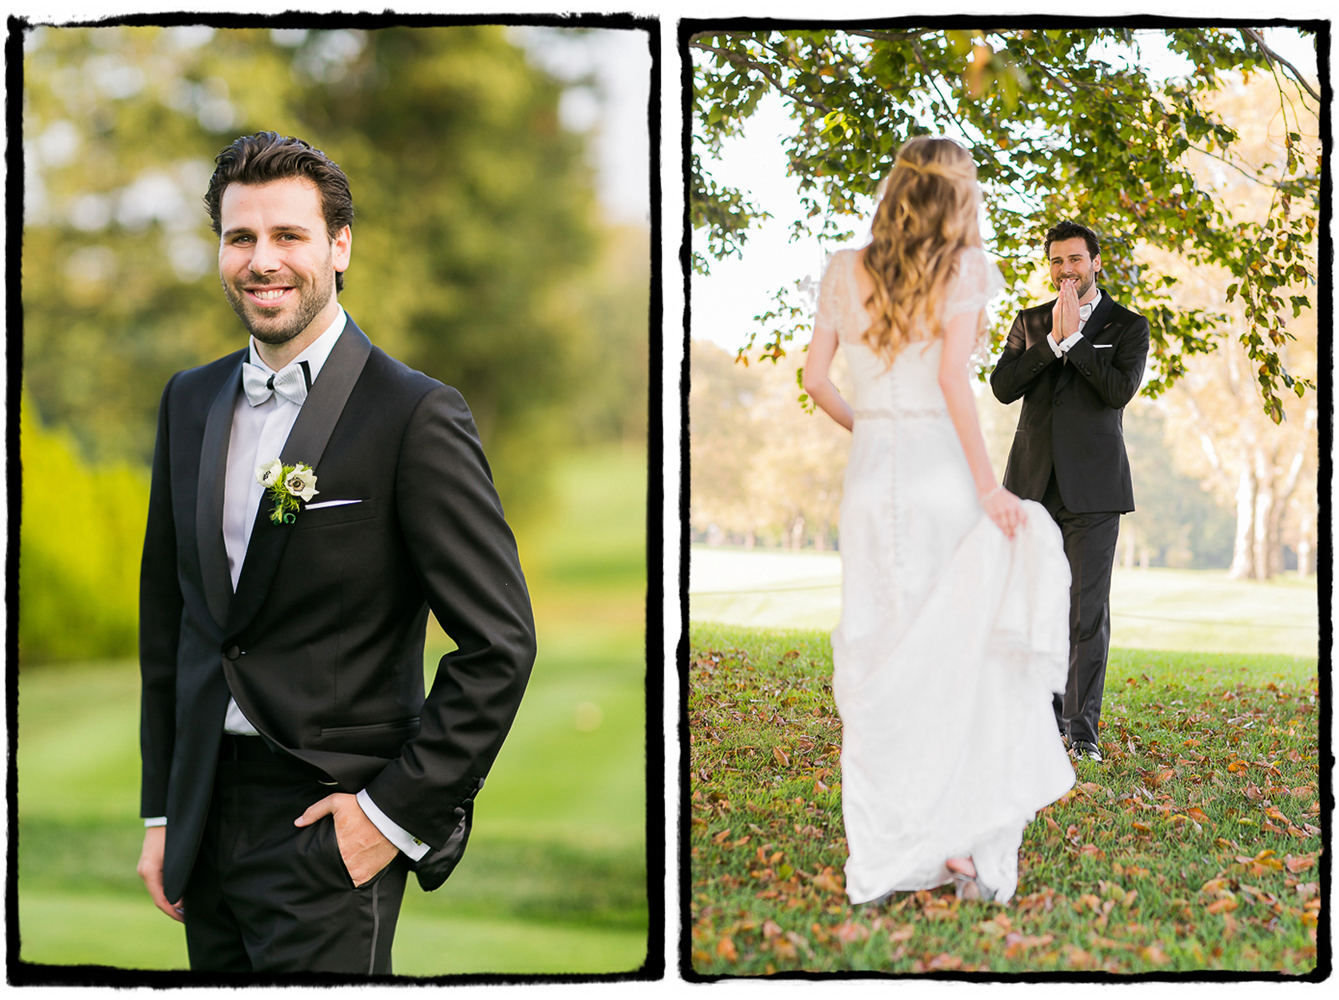 Jaymie and Brad shared a first look under a giant tree on the green at Fresh Meadow Country Club.